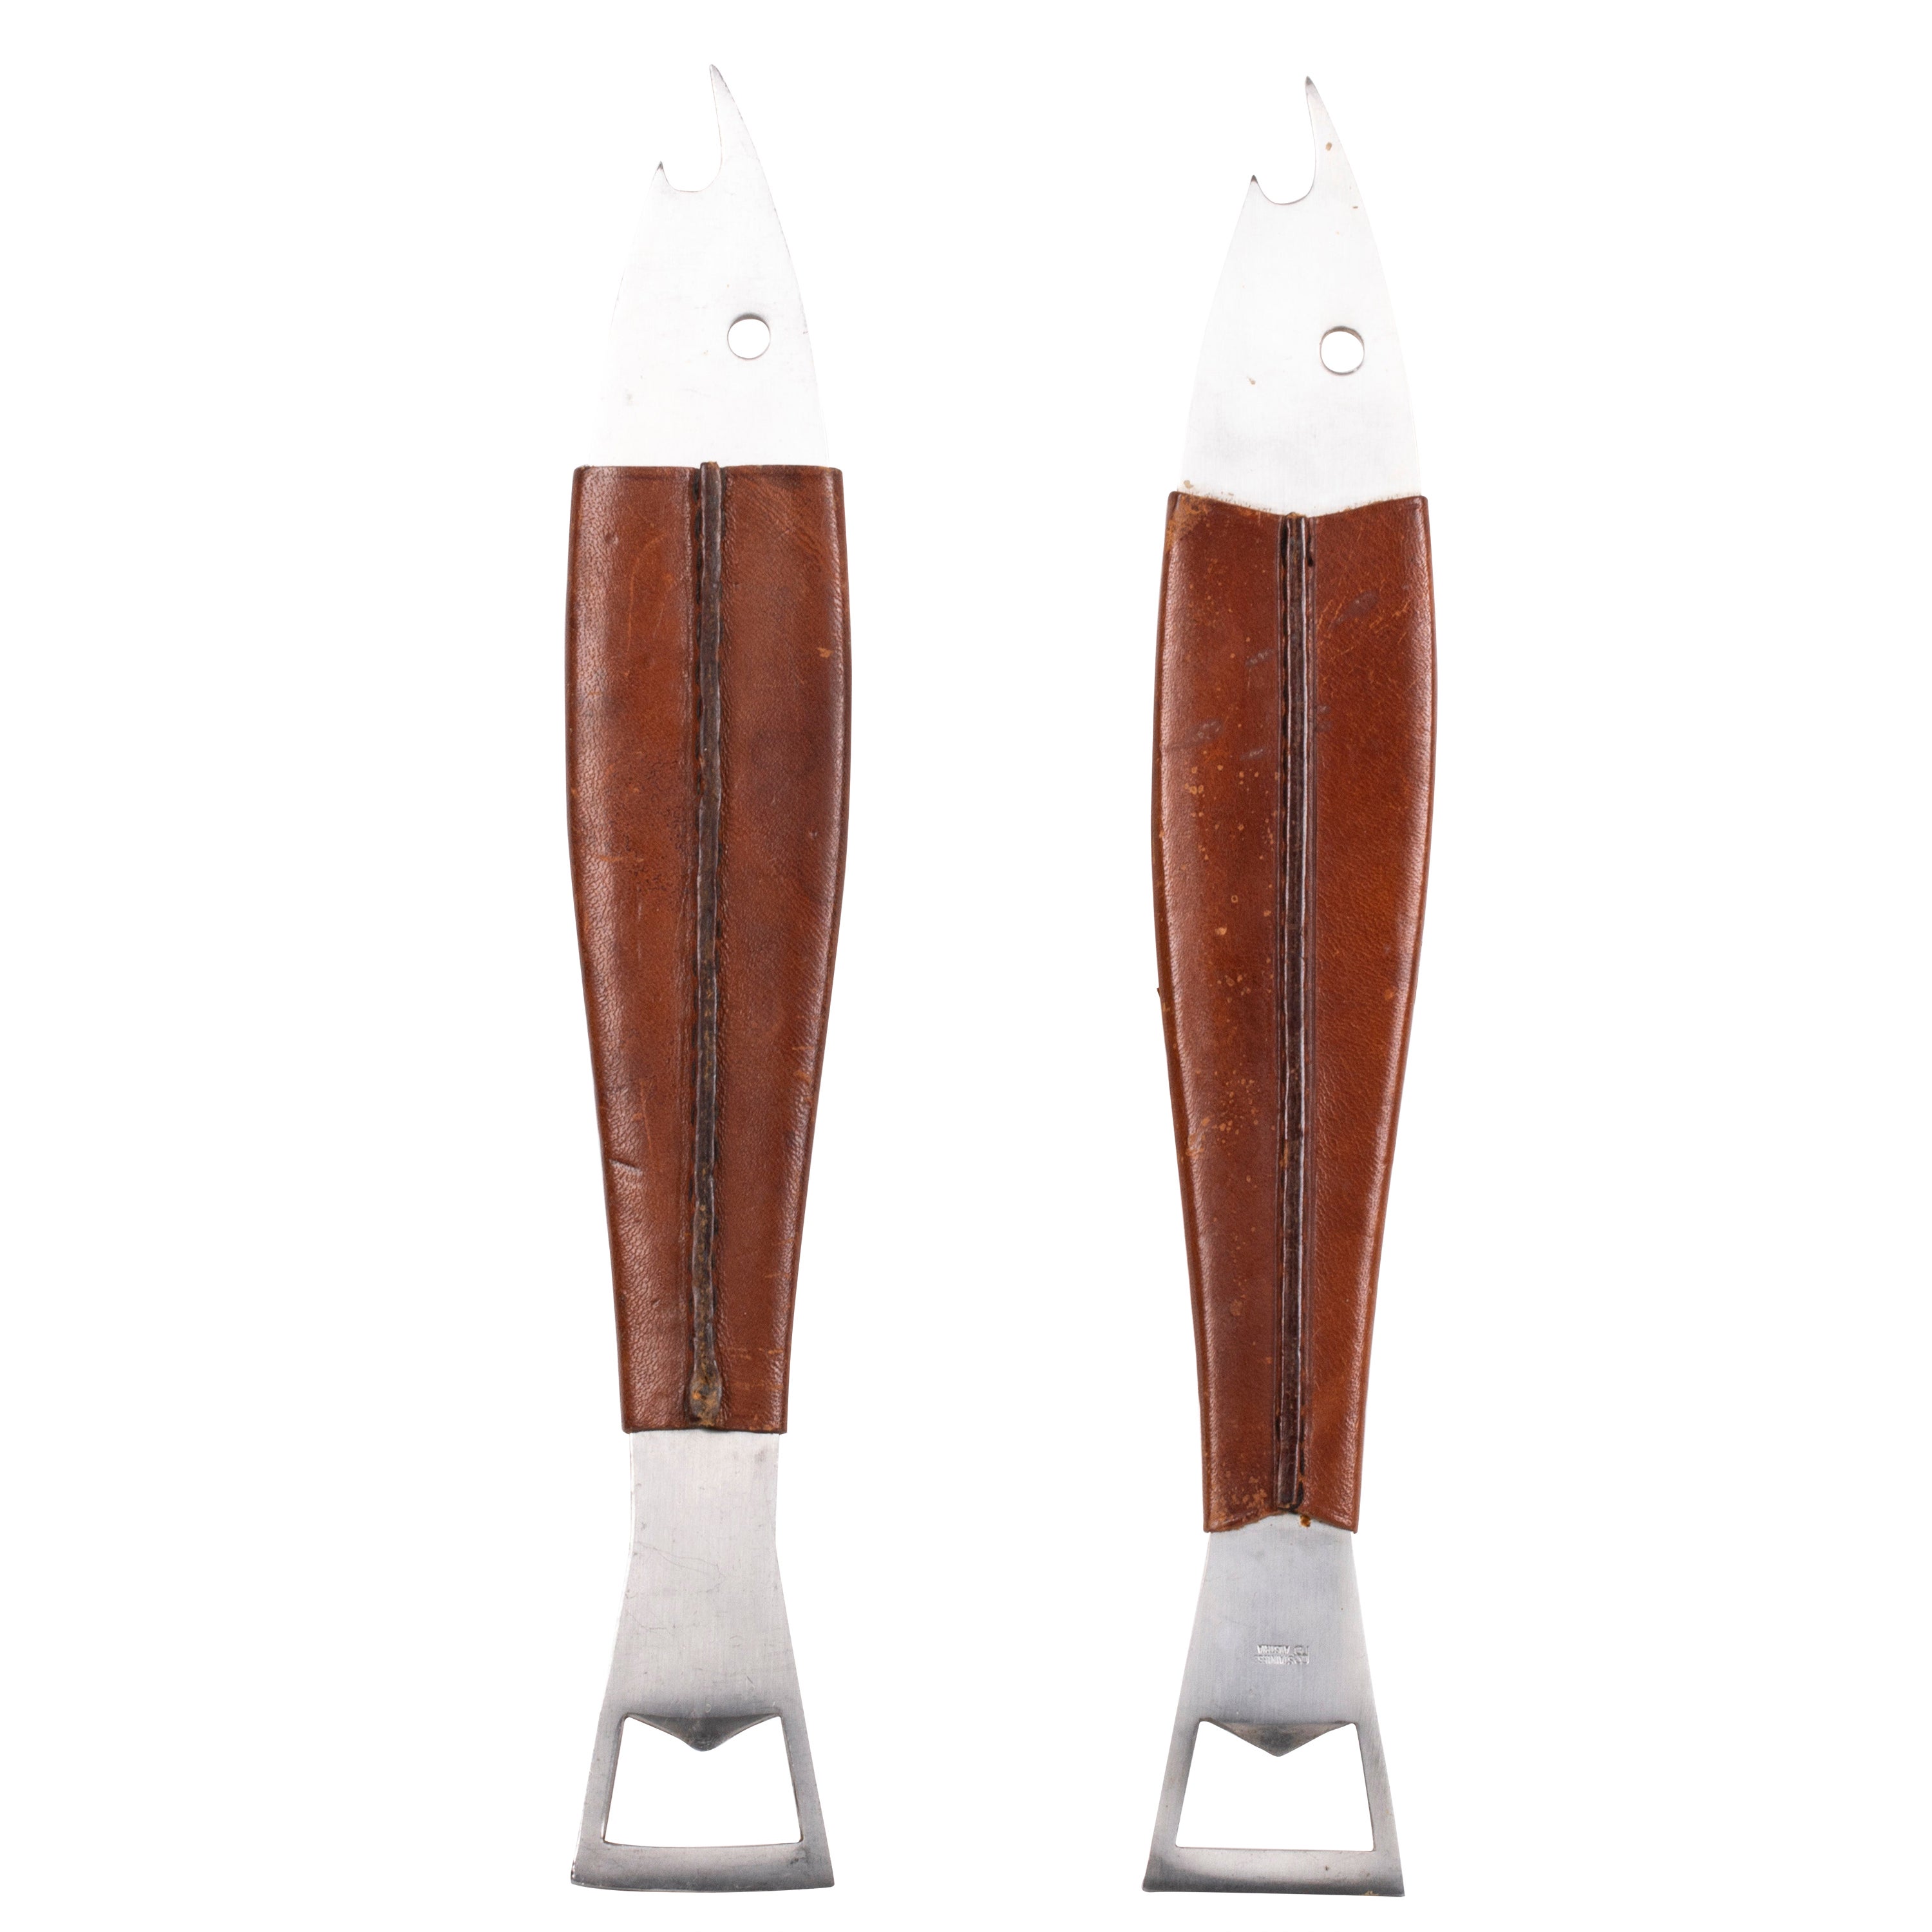 Carl Auböck Pair of Bottle Openers in Leather and Steel, Austria, 1960s